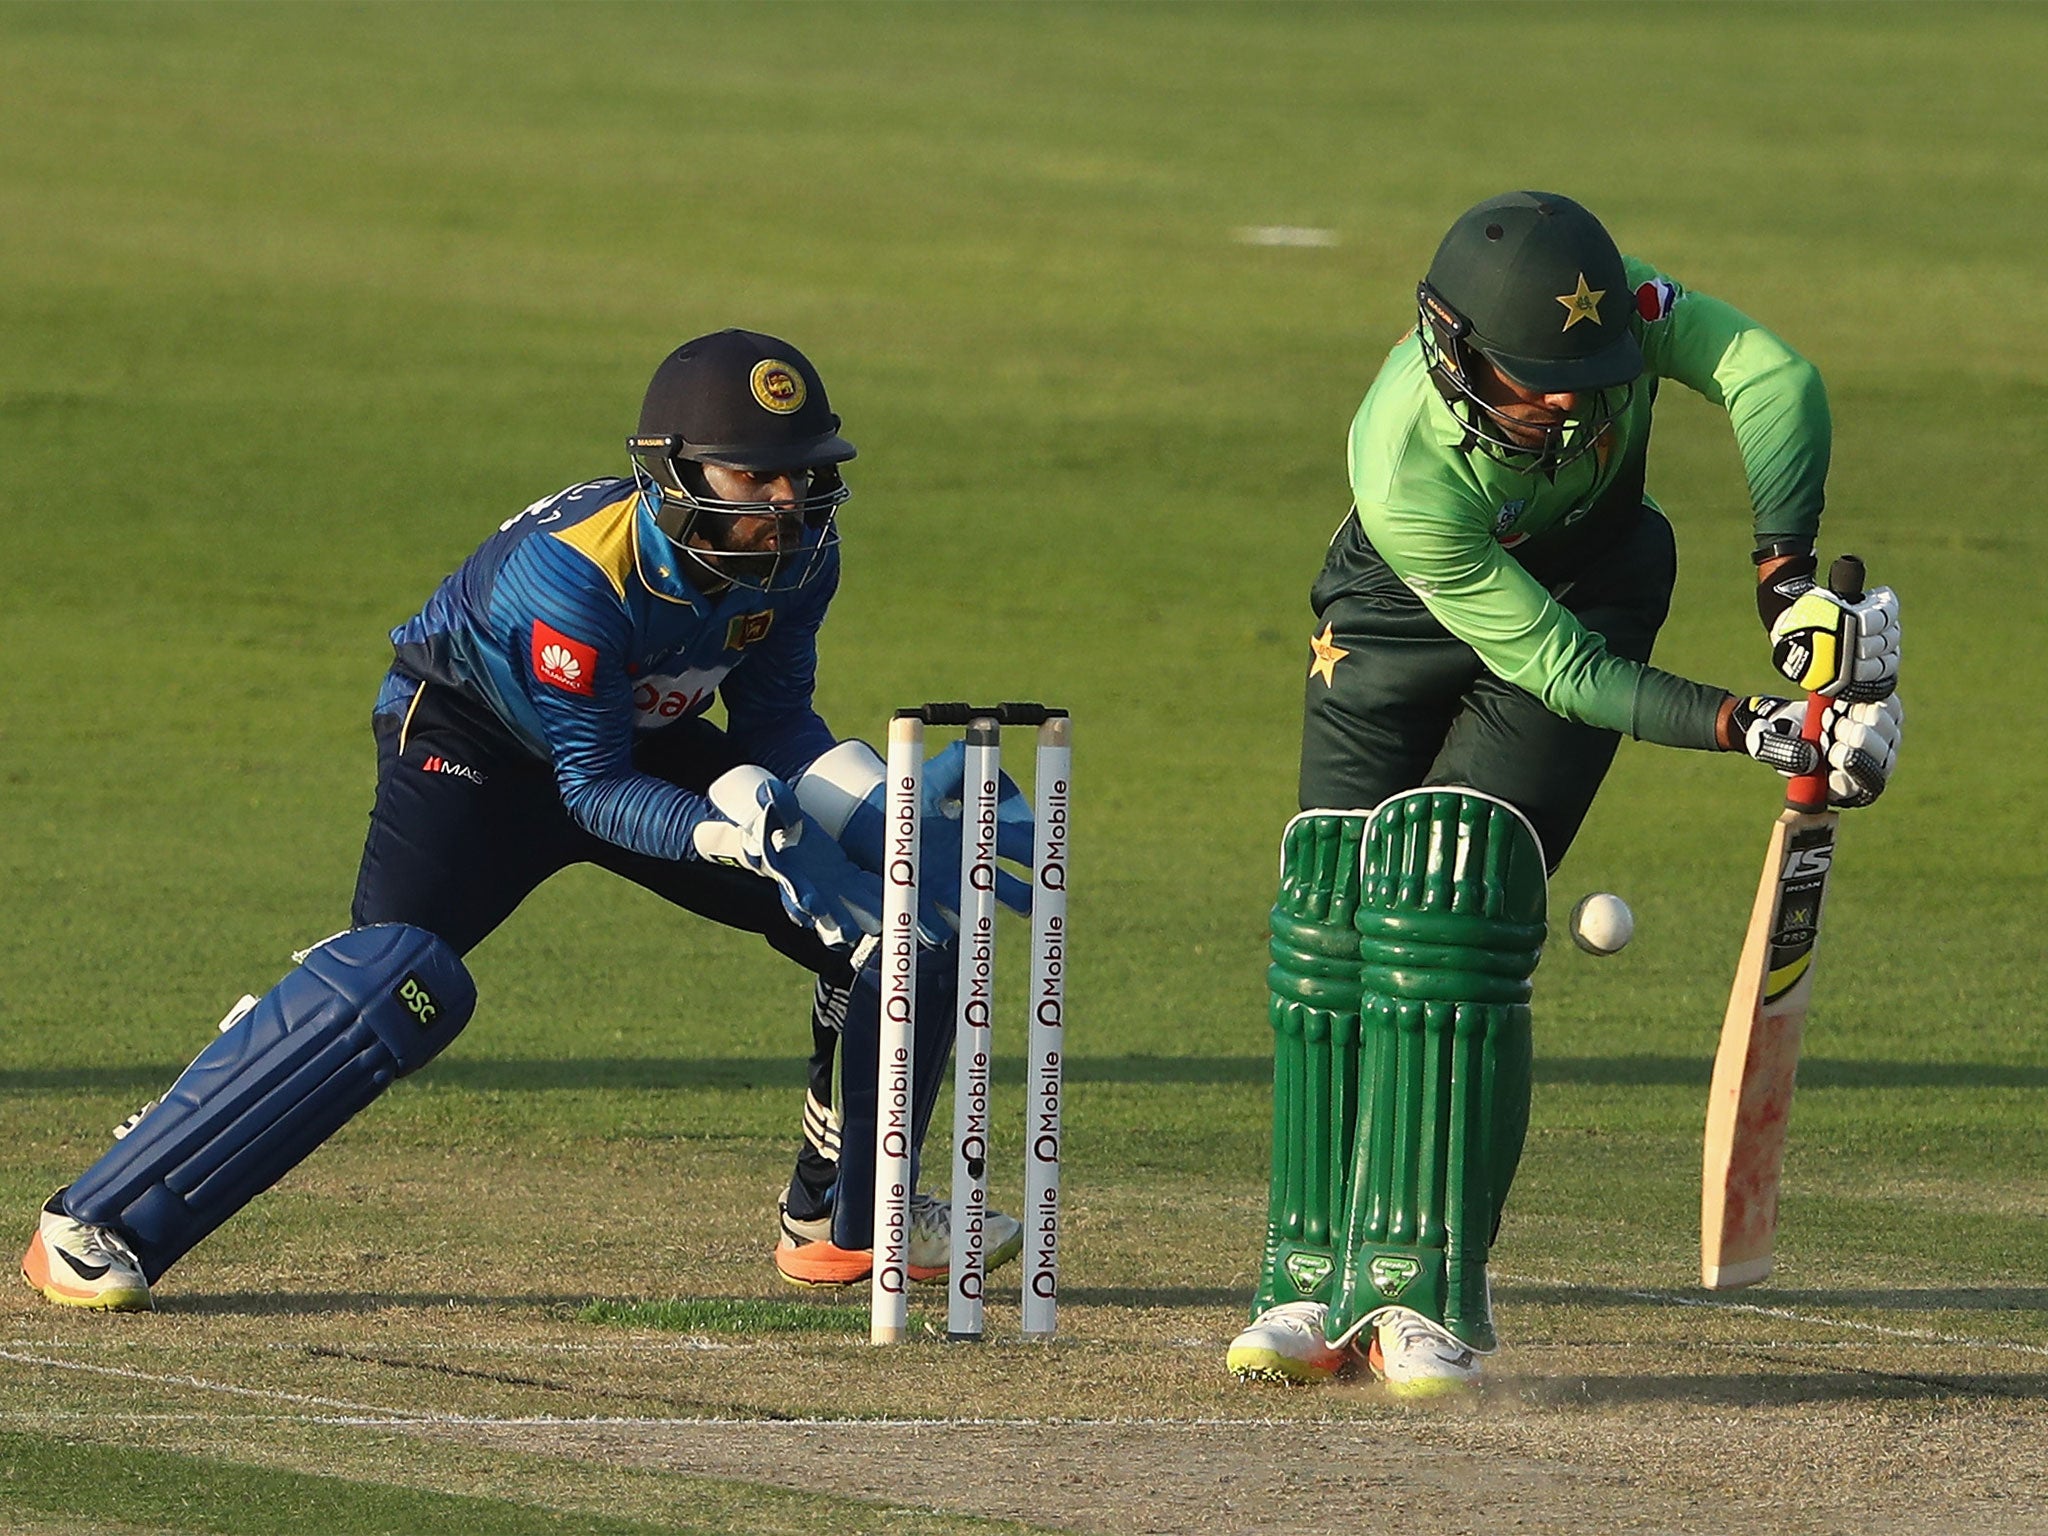 Pakistan and Sri Lanka will play an international in Lahore this month